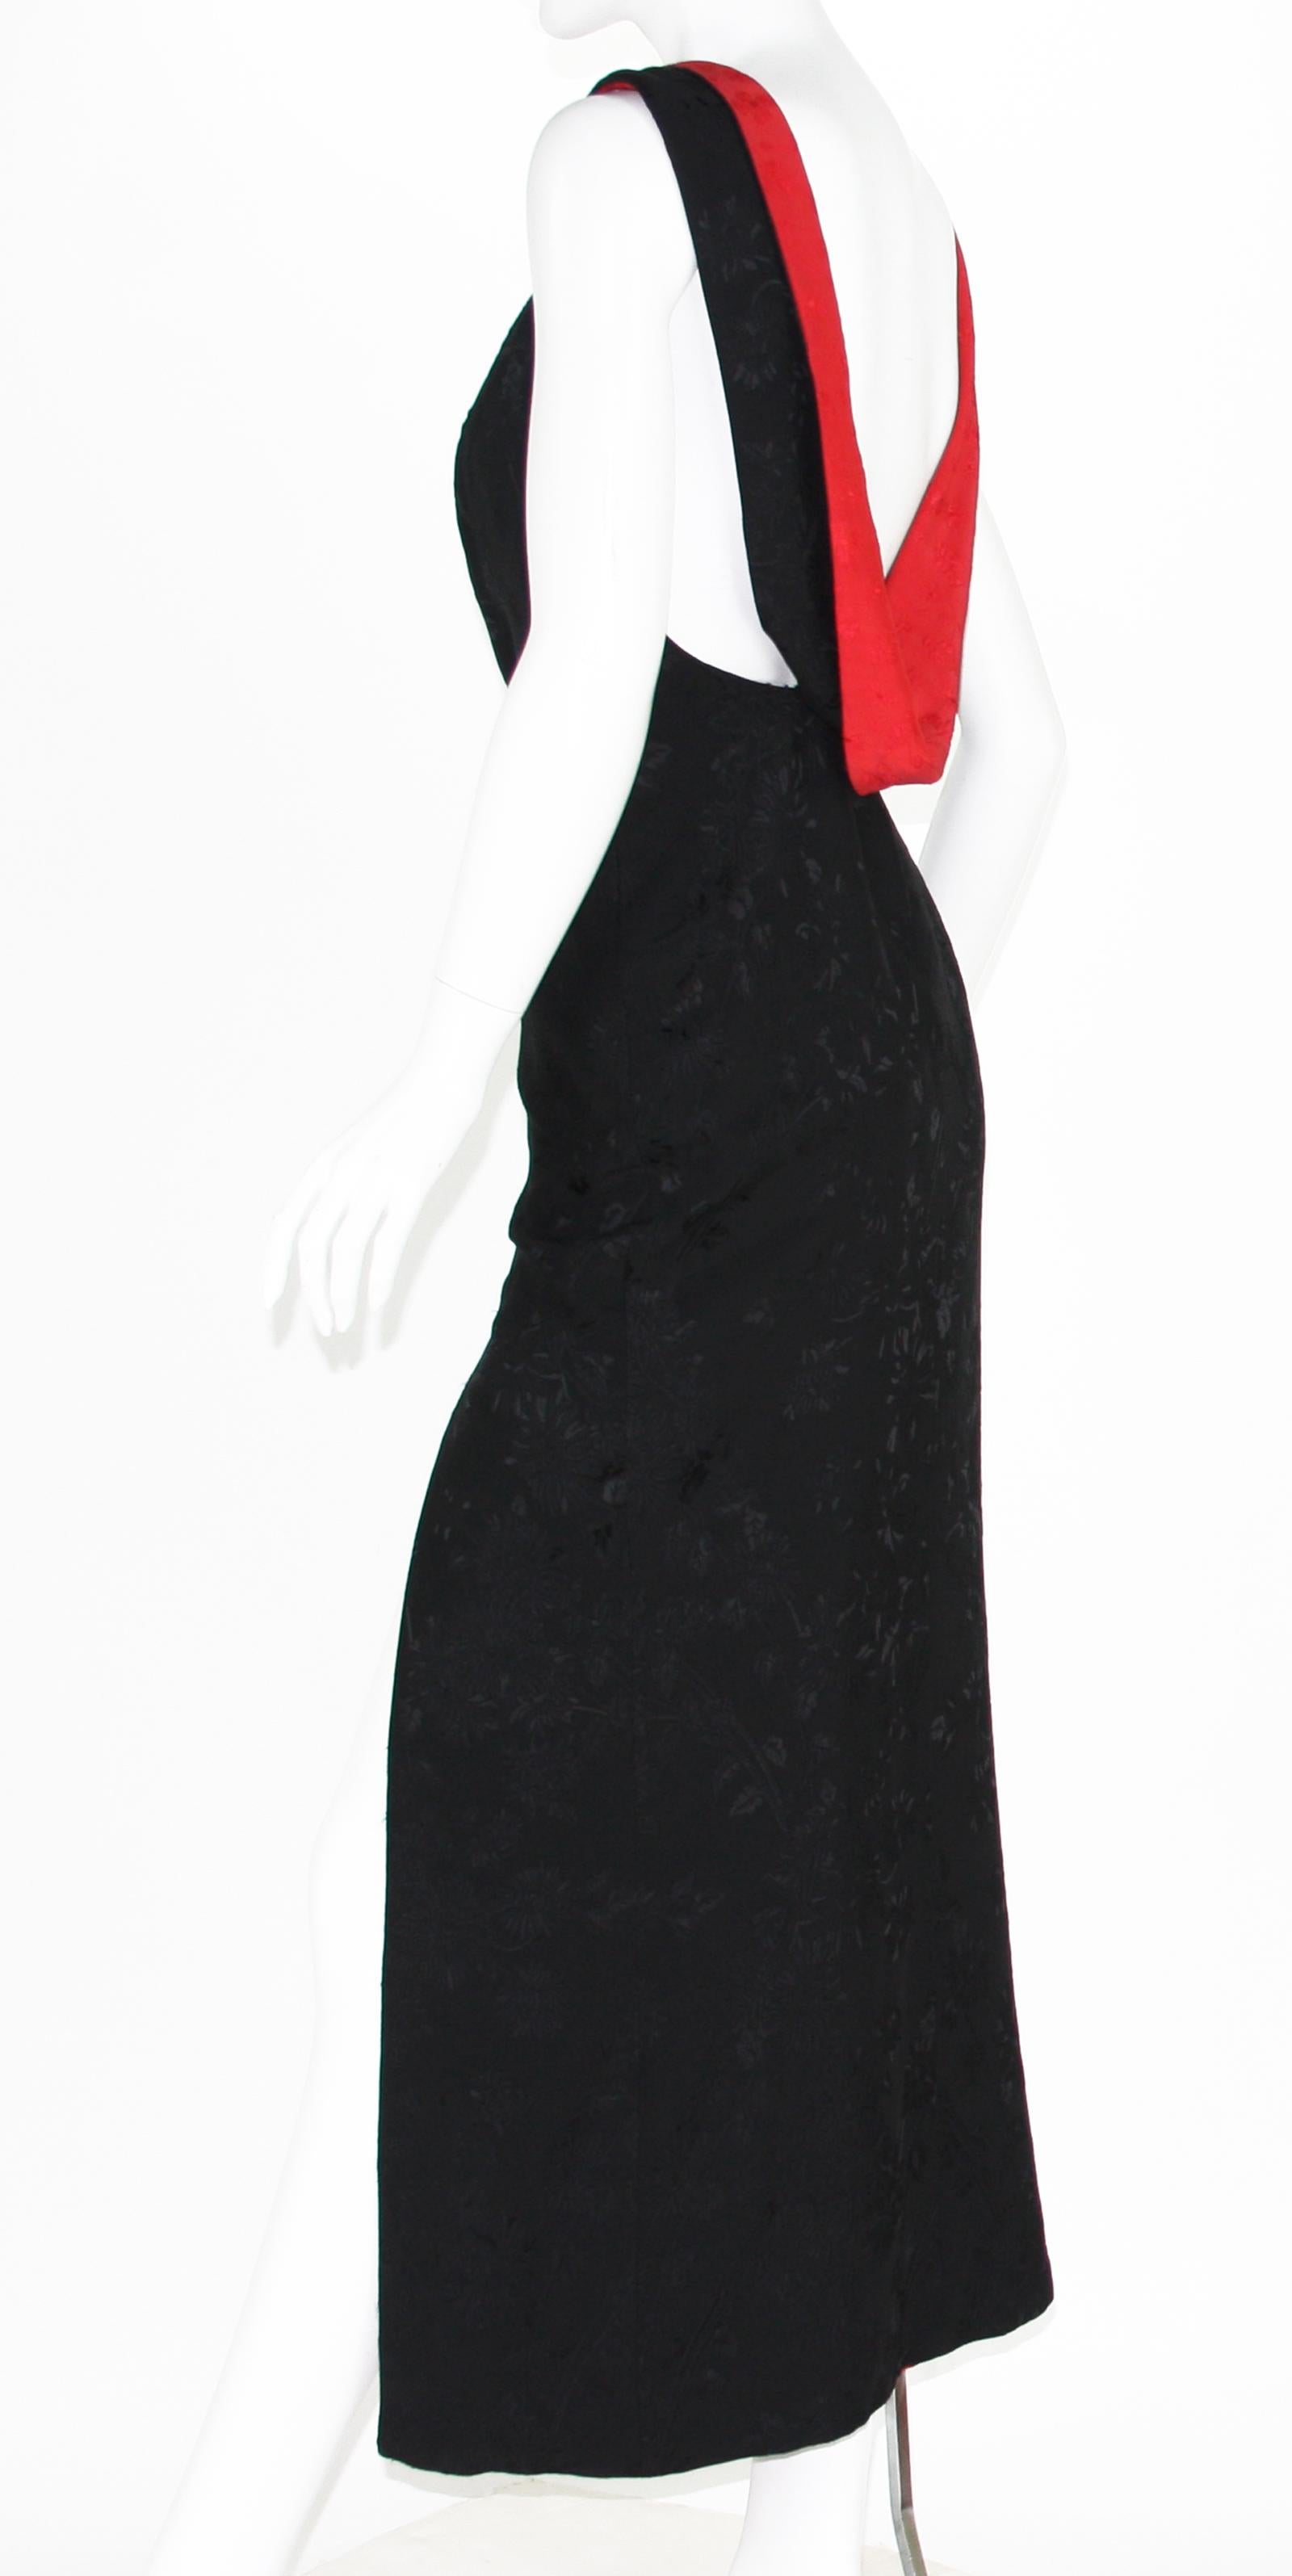 Gianni Versace Couture S/S 1998 Collection Black and Red Open Back Dress Gown  In Excellent Condition For Sale In Montgomery, TX